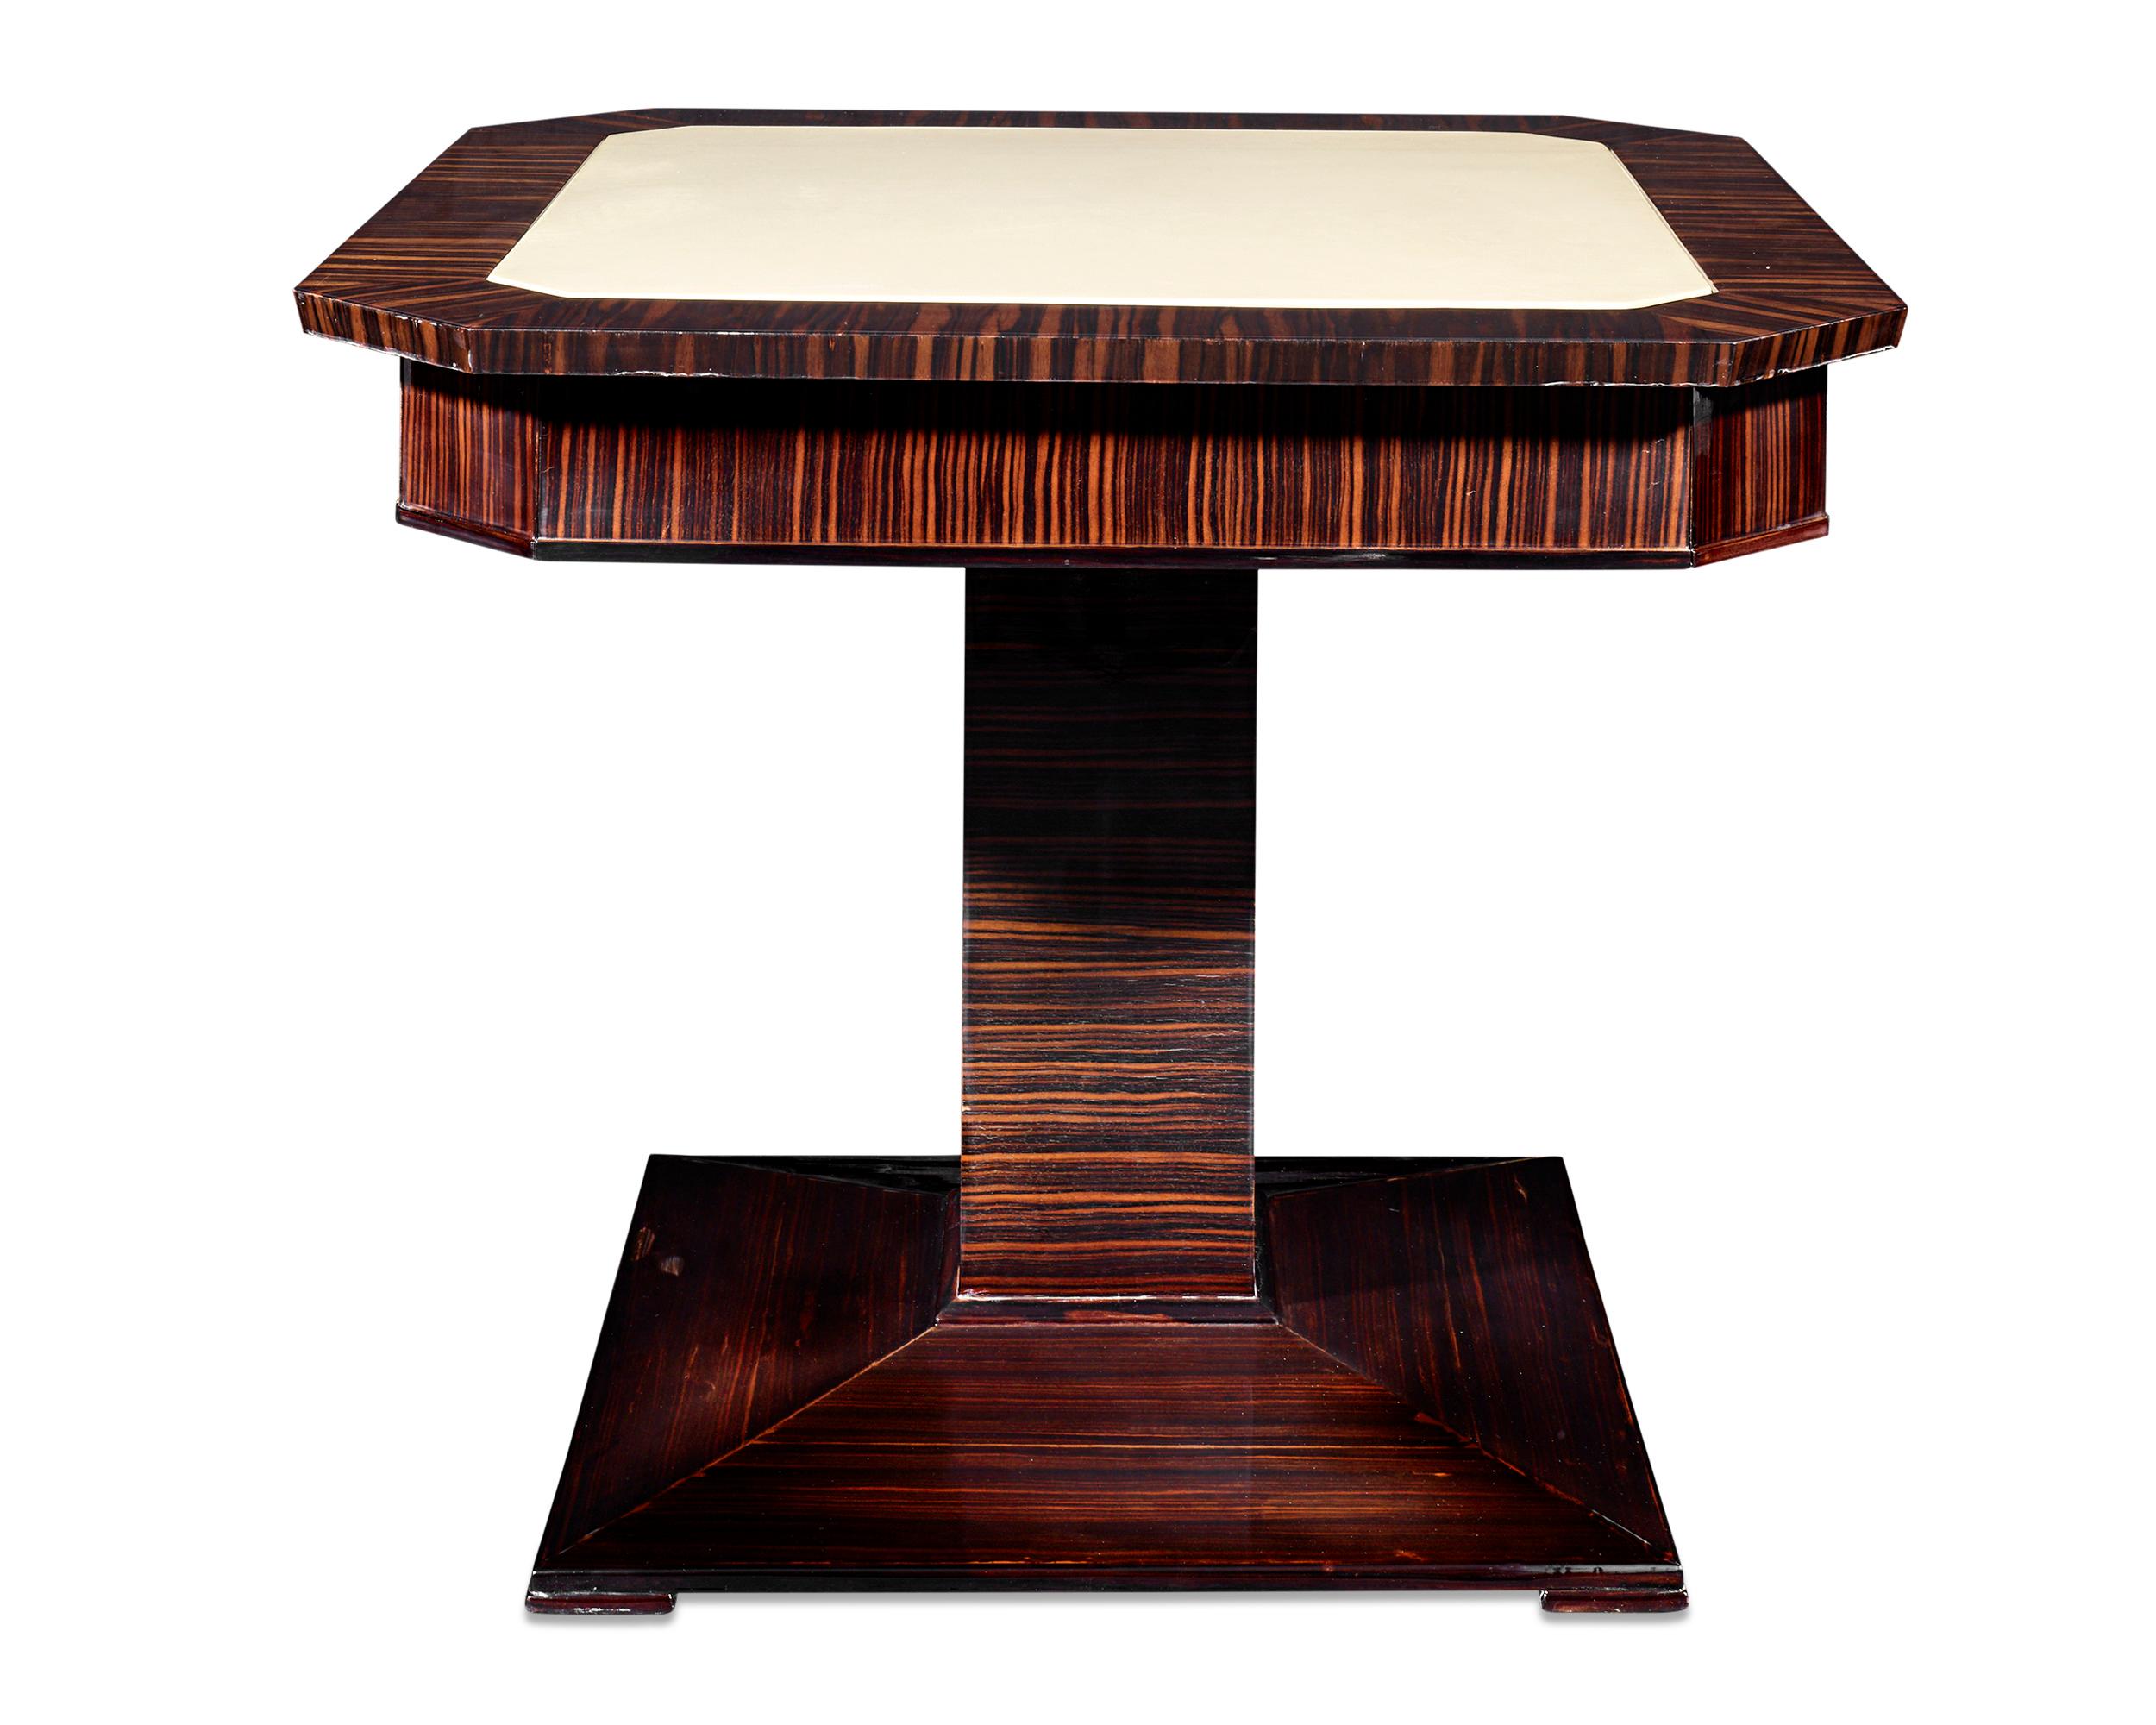 The splendor and elegance of Art Deco design are beautifully illustrated by this fine French card table and chairs set. Crafted of luxurious rosewood, the table features canted edges, an inlaid leather top and a banded apron atop a squared column